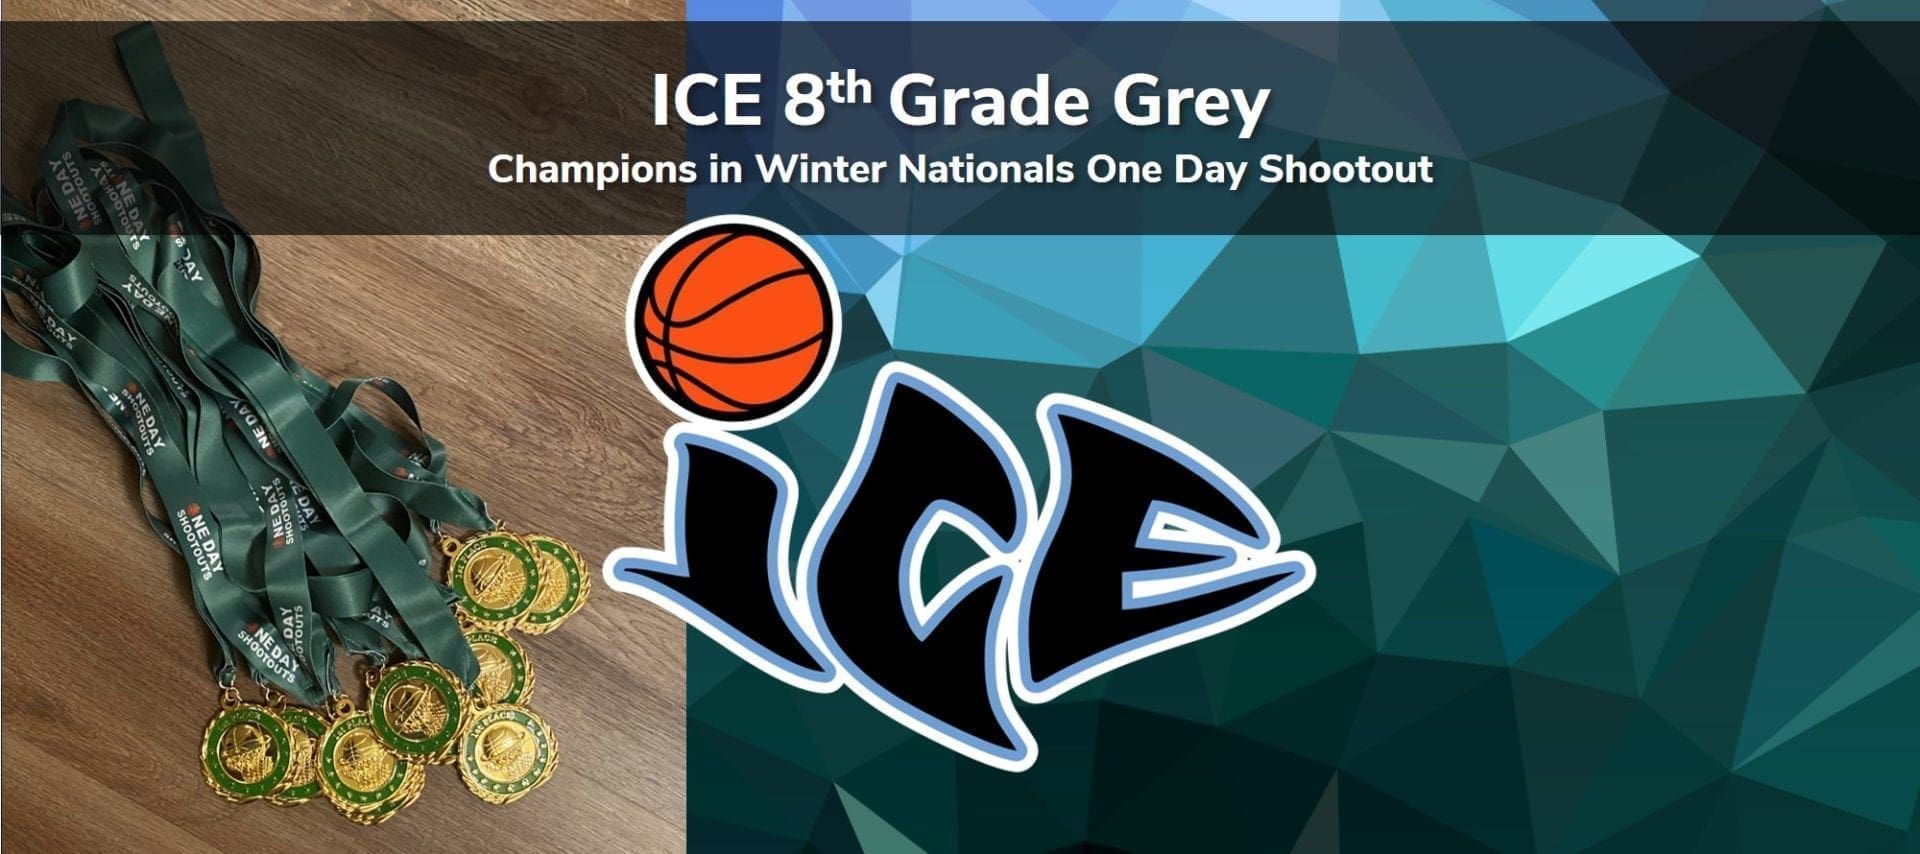 8th Grade Grey – Champions in Winter Nationals One Day Shootout